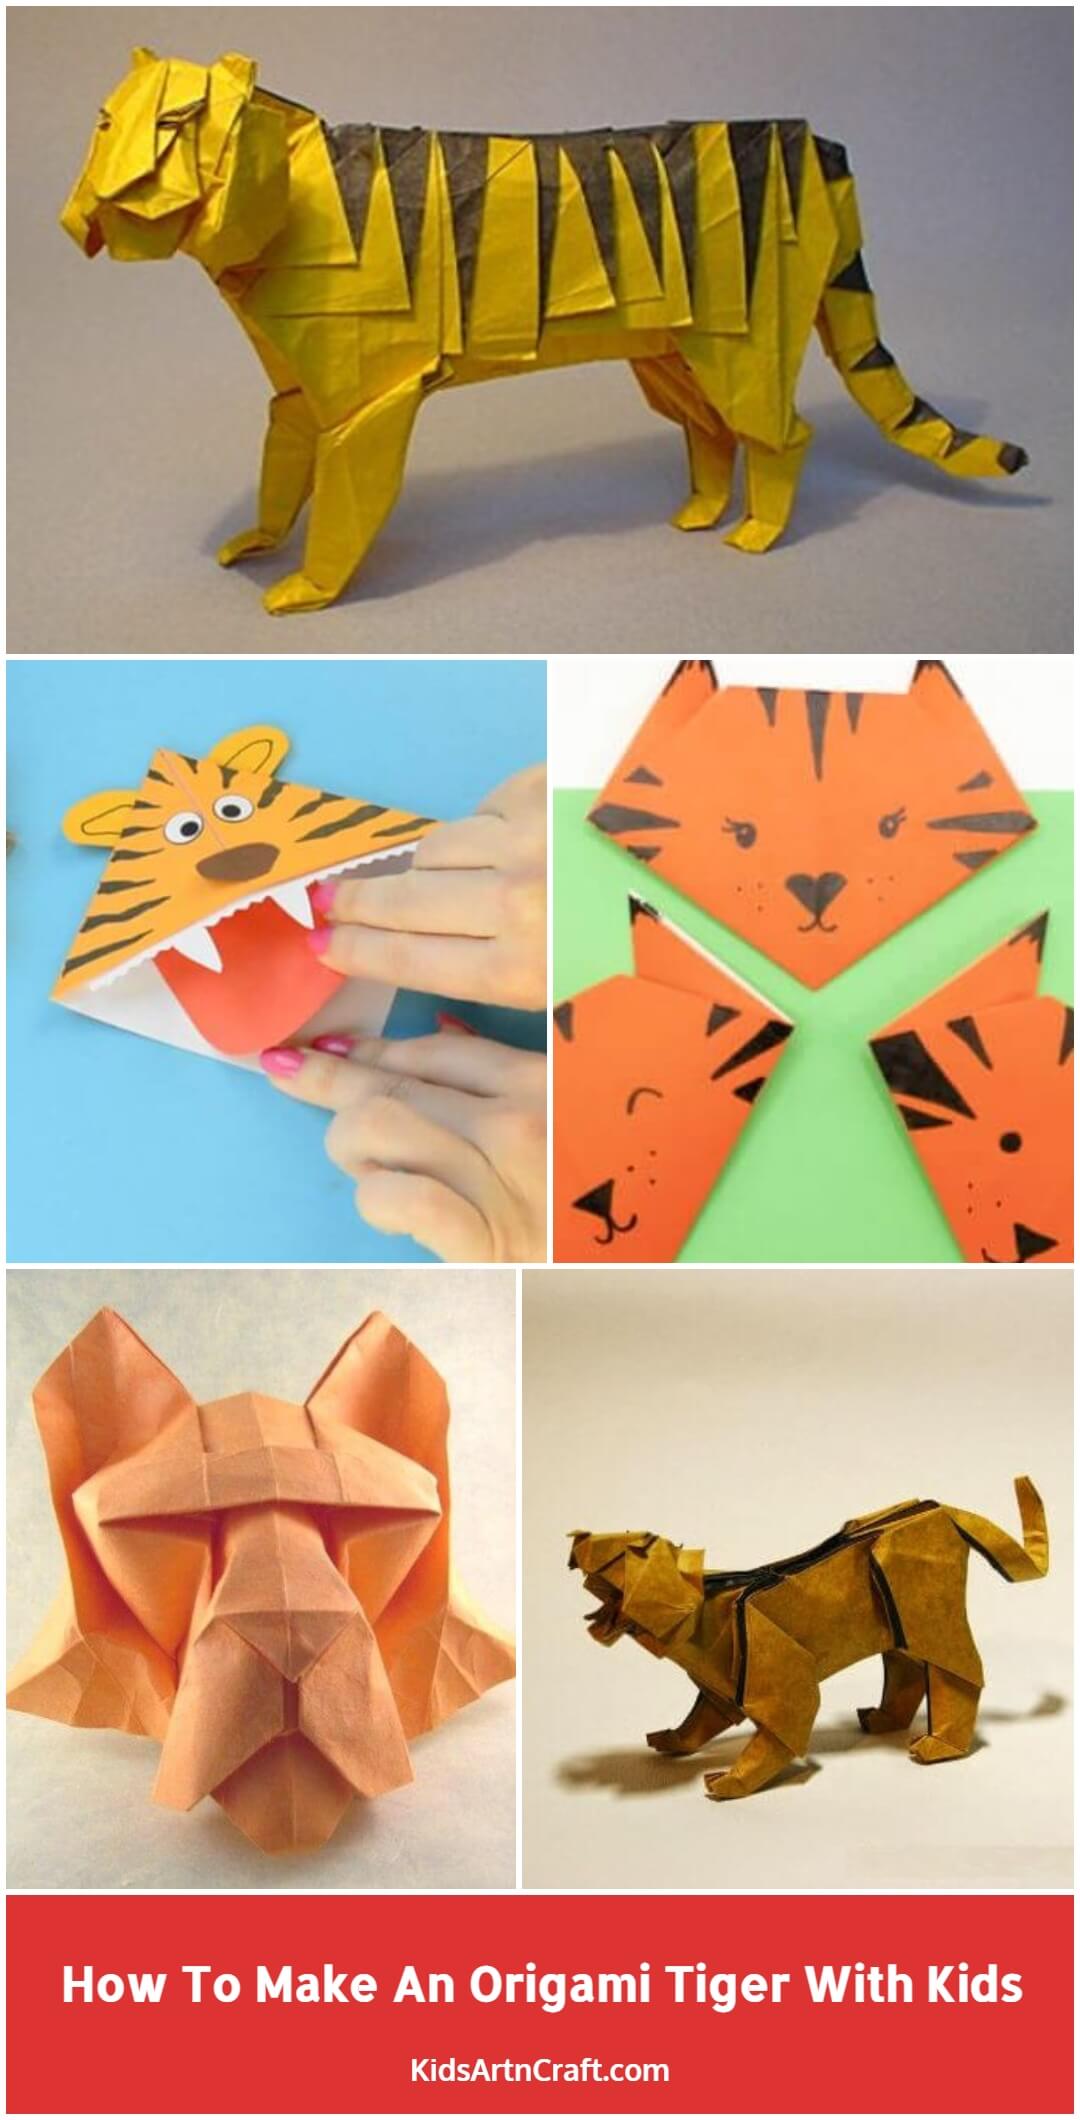 How To Make An Origami Tiger With Kids